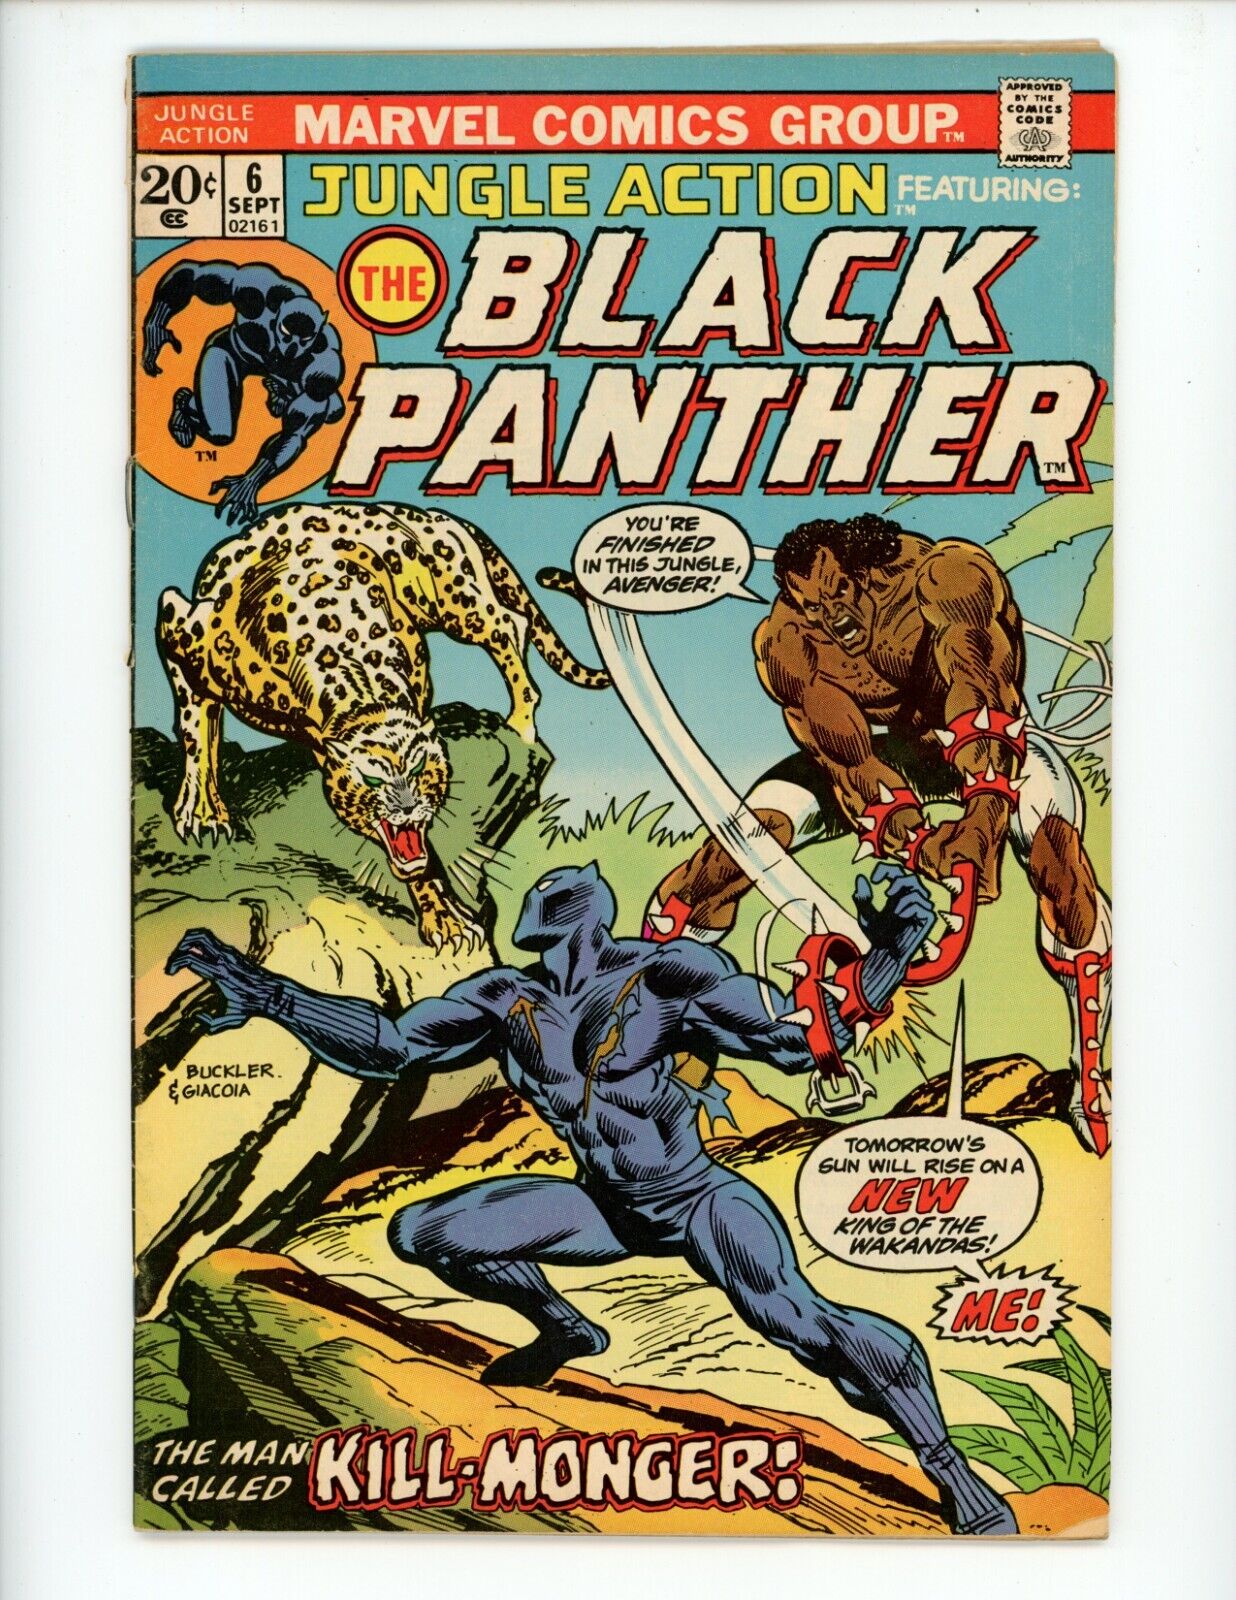 Jungle Action #6 Comic Book 1973 FN- 1st App Kill-Monger Black Panther Solo